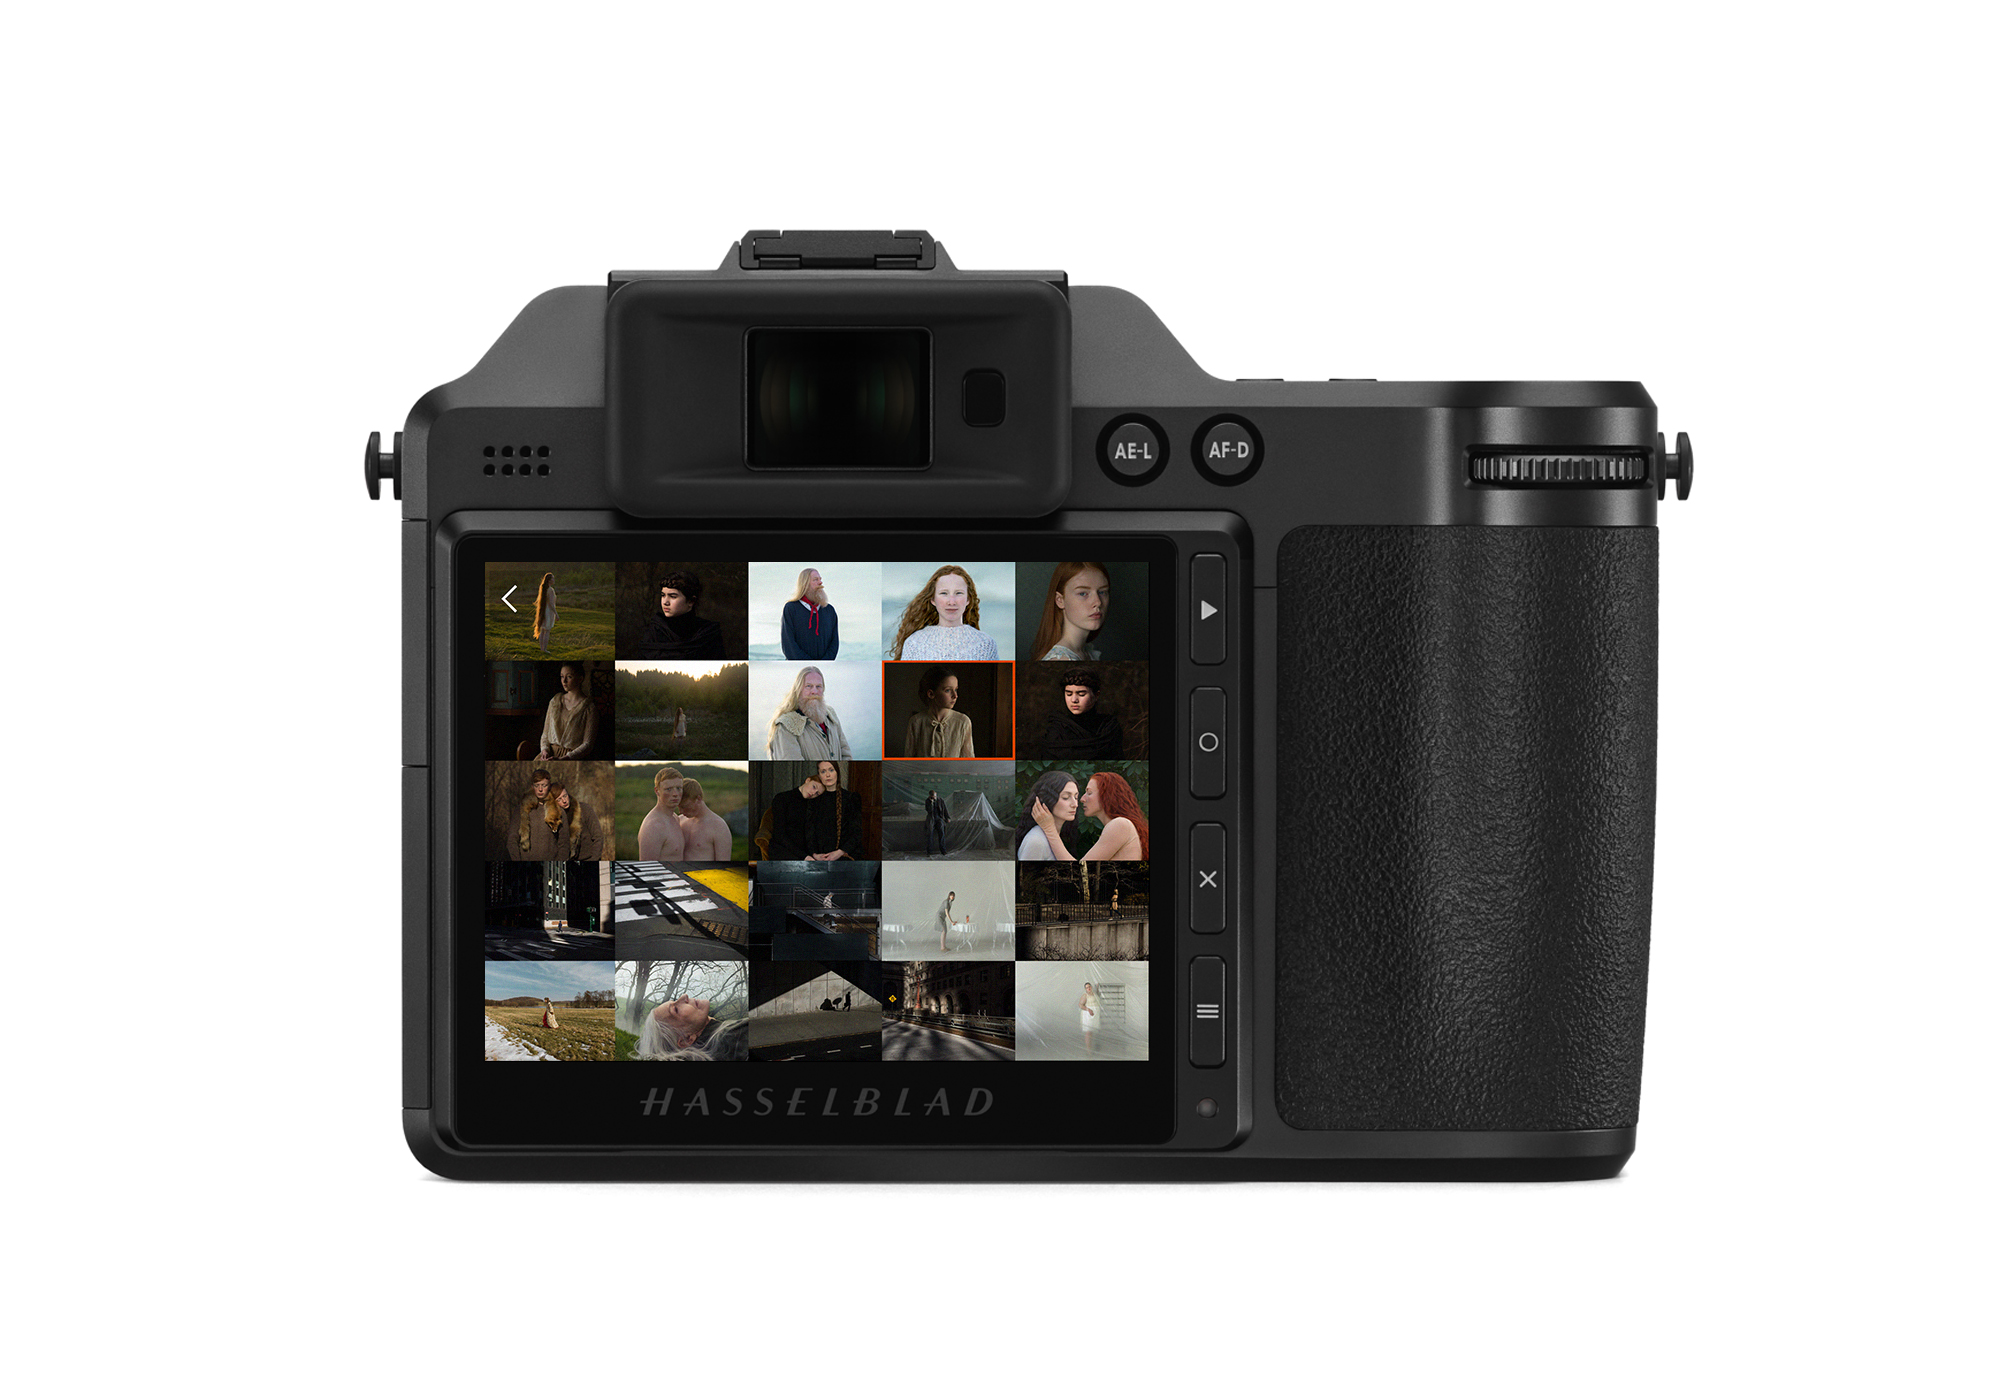 image-browse-hasselblad -X2D FIRMWARE UPDATE 2.0.0